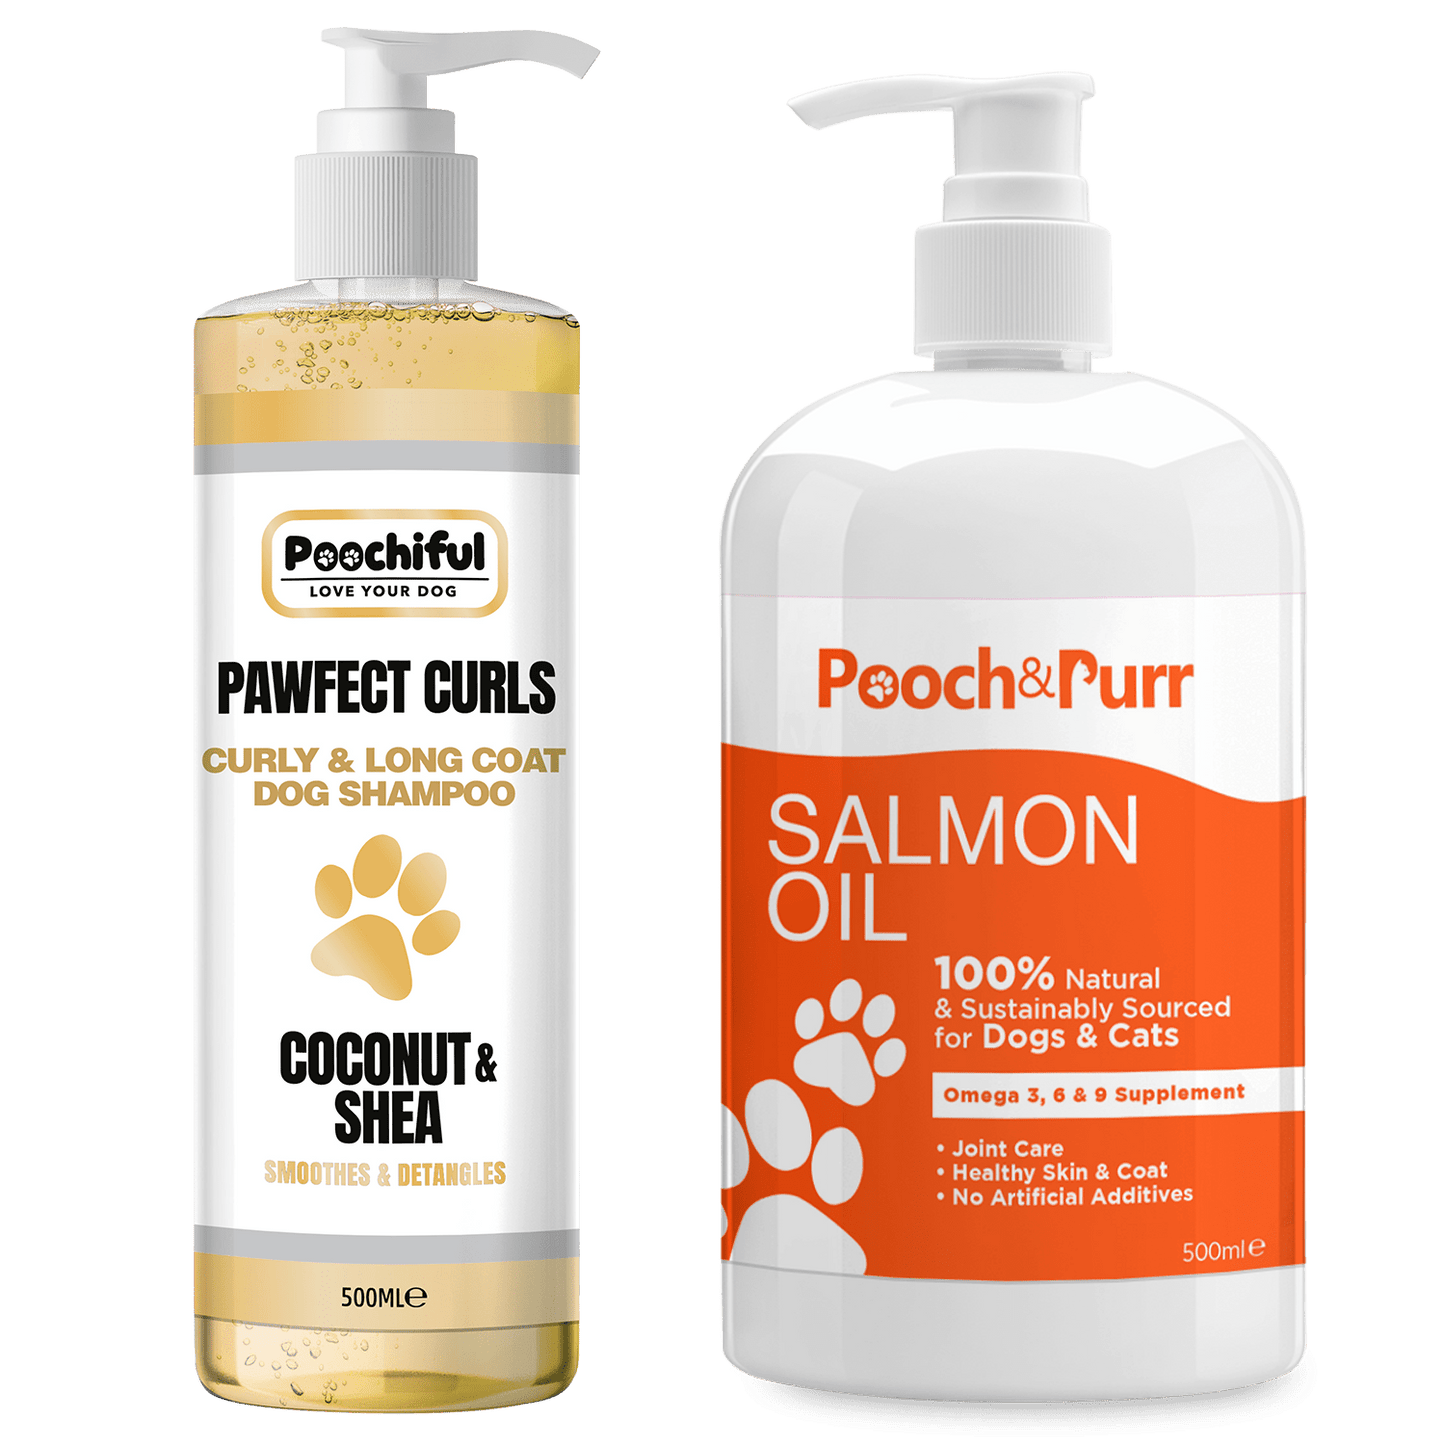 Pawfect Curls 500ml + Pooch And Purr Salmon Oil 500ml Bundle